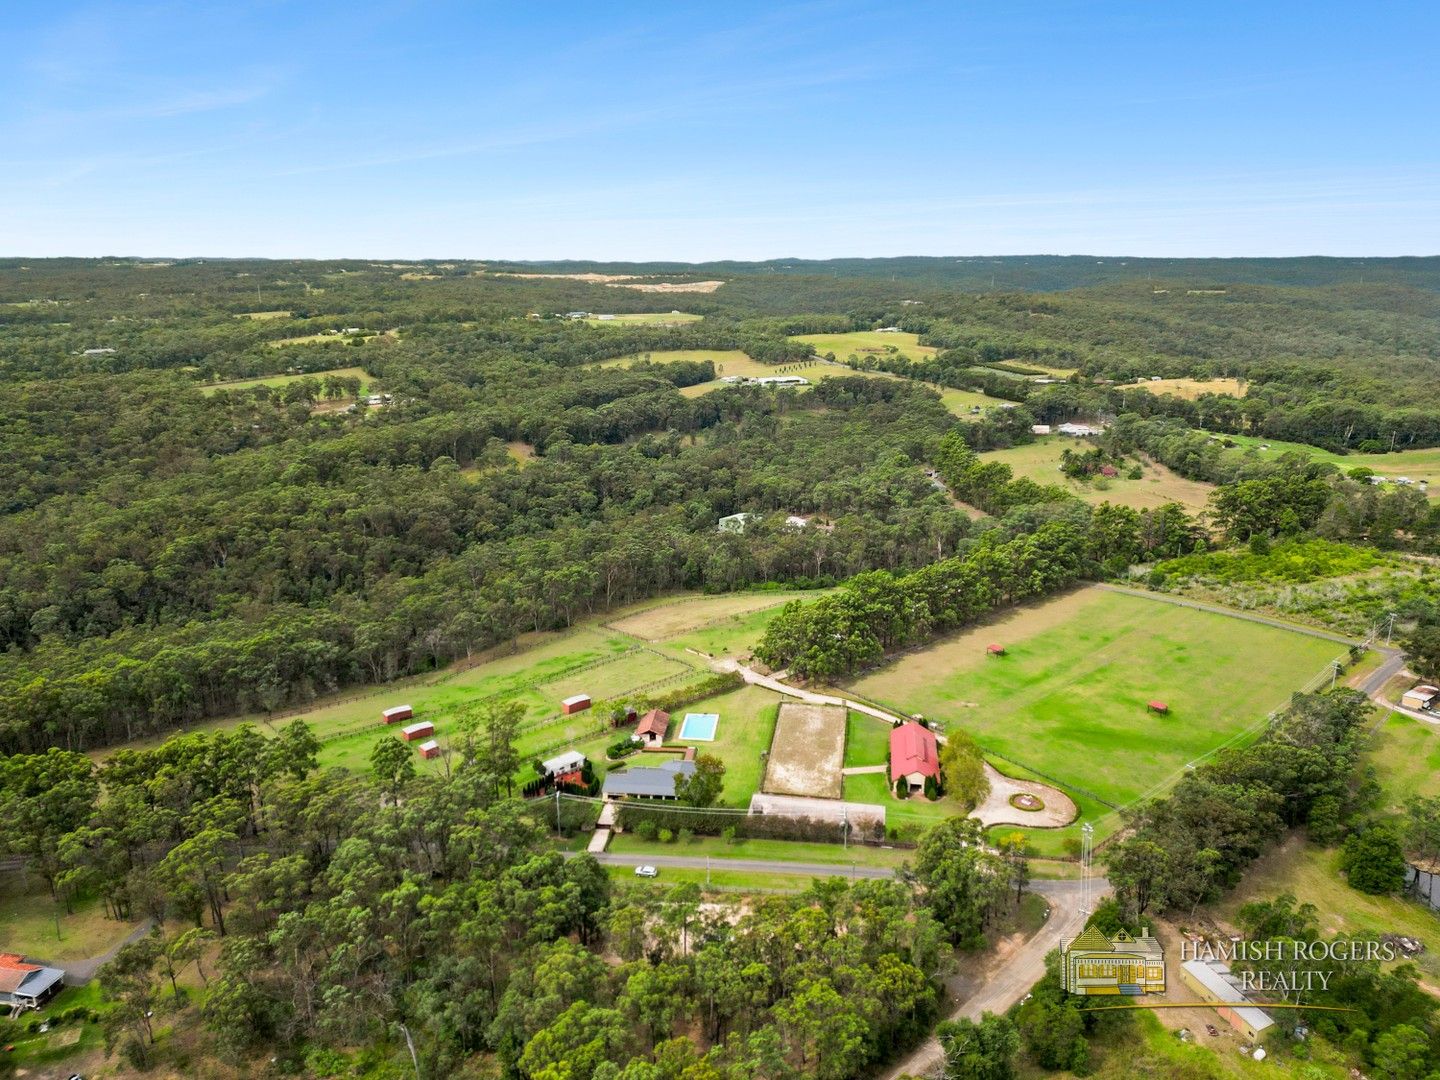 4 bedrooms Rural in 55 Gallaghers Road SOUTH MAROOTA NSW, 2756